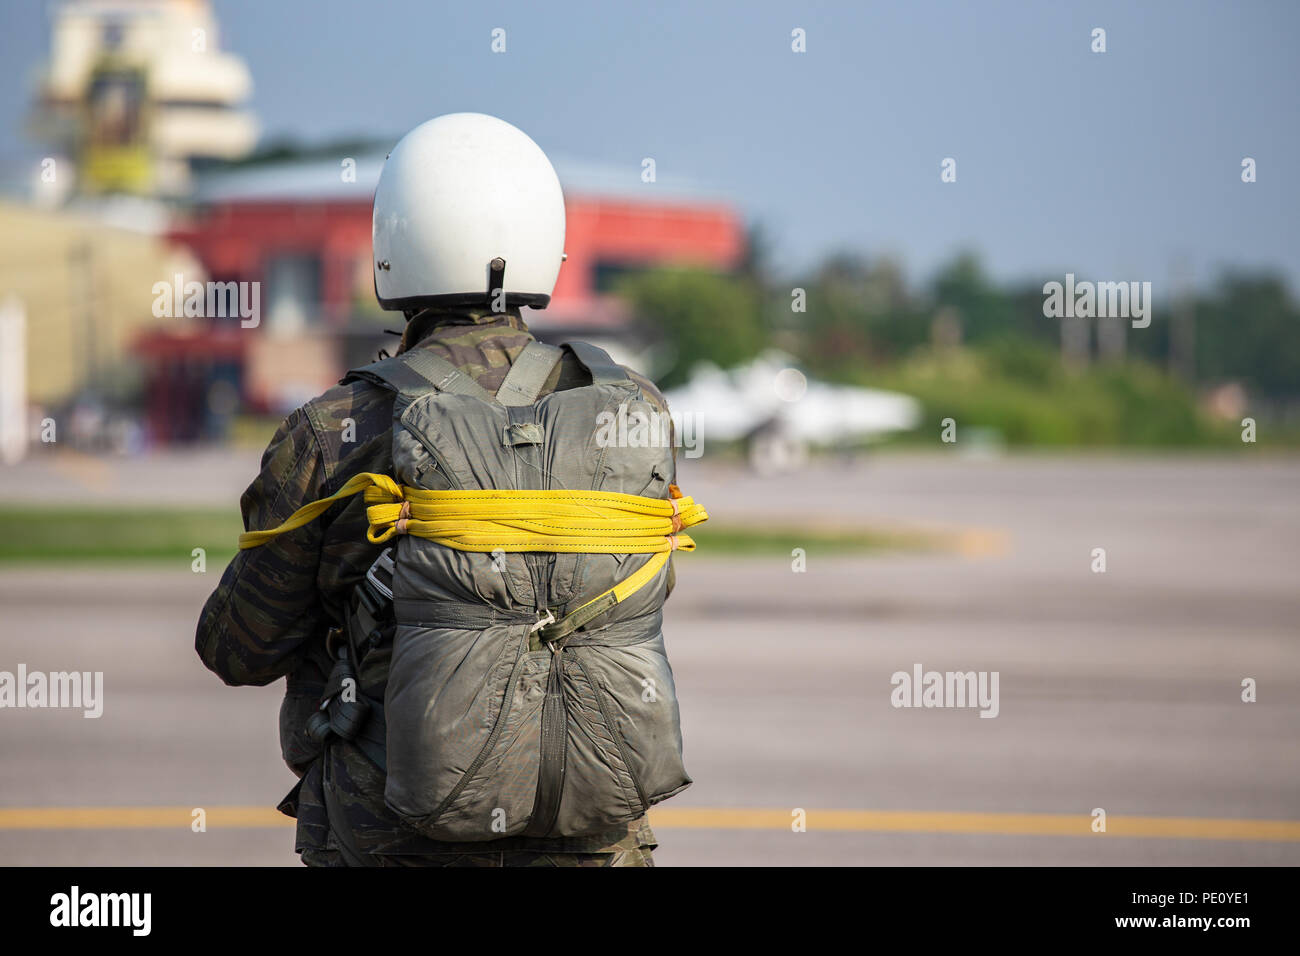 Police paratrooper in camouflage uniform and helmet with T-10 static line parachute  and equipment standby at airfield with copy space Stock Photo